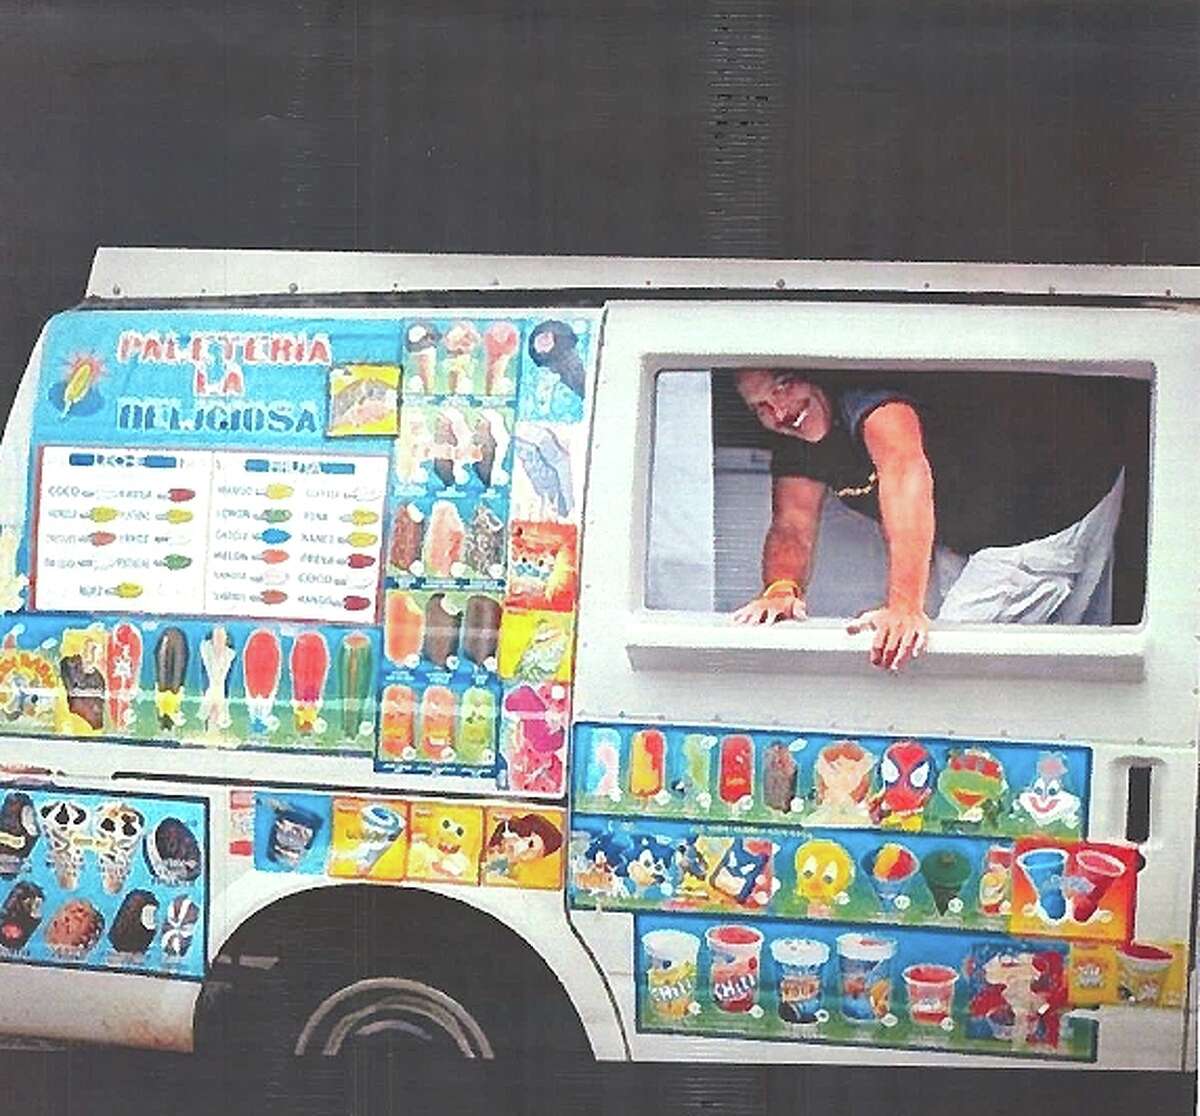 Marshals Arrest Ice Cream Truck Driver In The Woodlands For Child Sex Assault